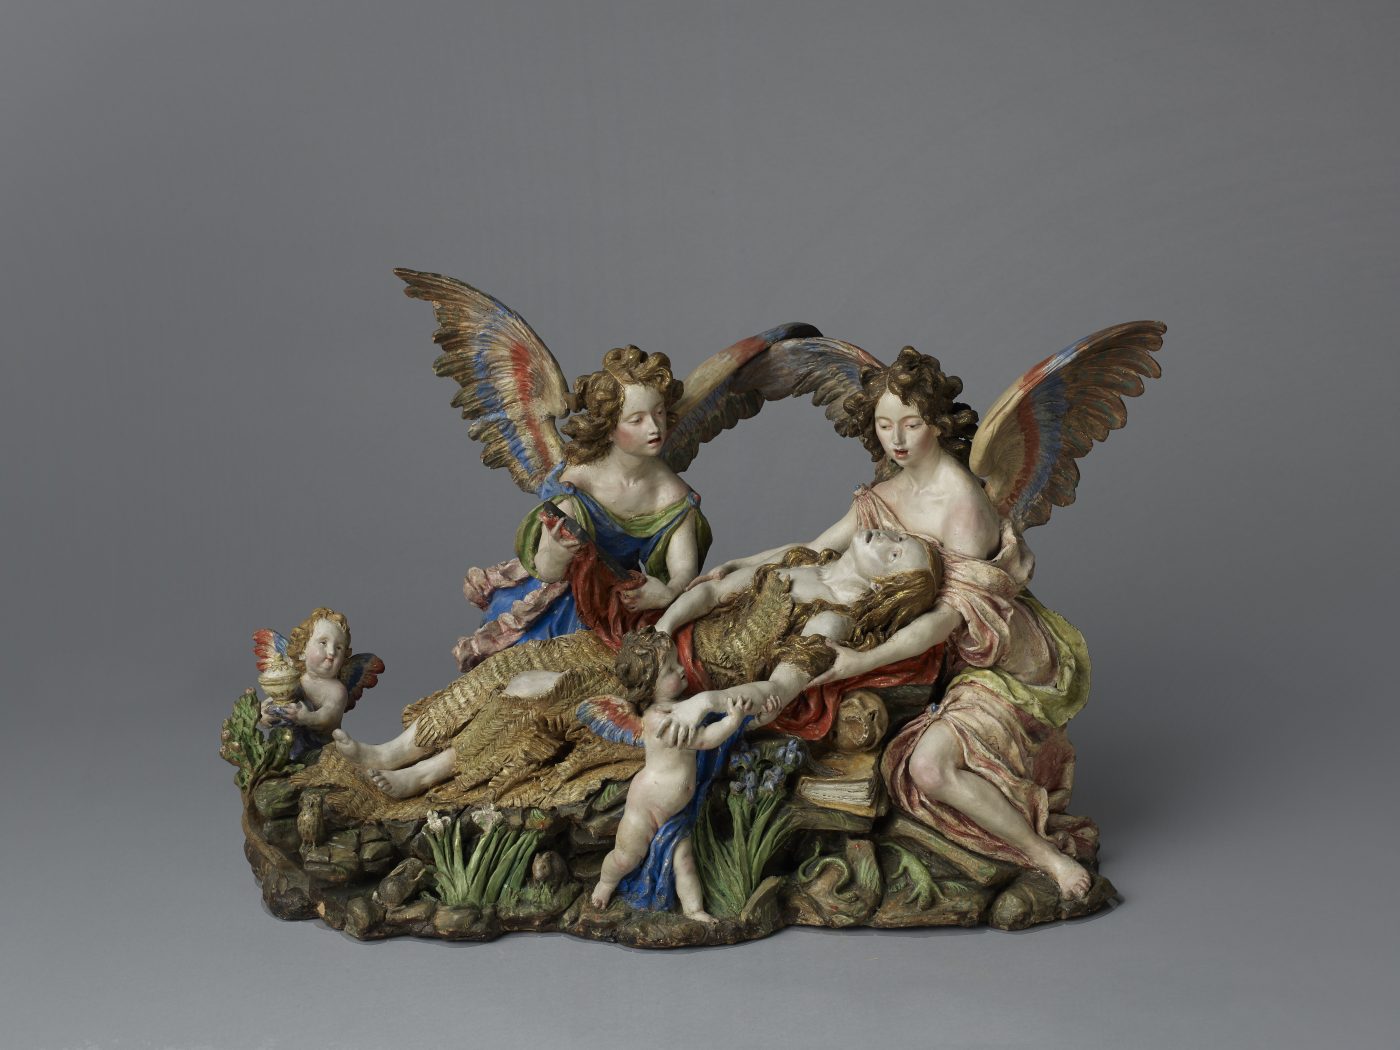 The Ecstasy of St. Mary Magdalene, 1692–1706, is a terracotta piece by Luisa Roldán